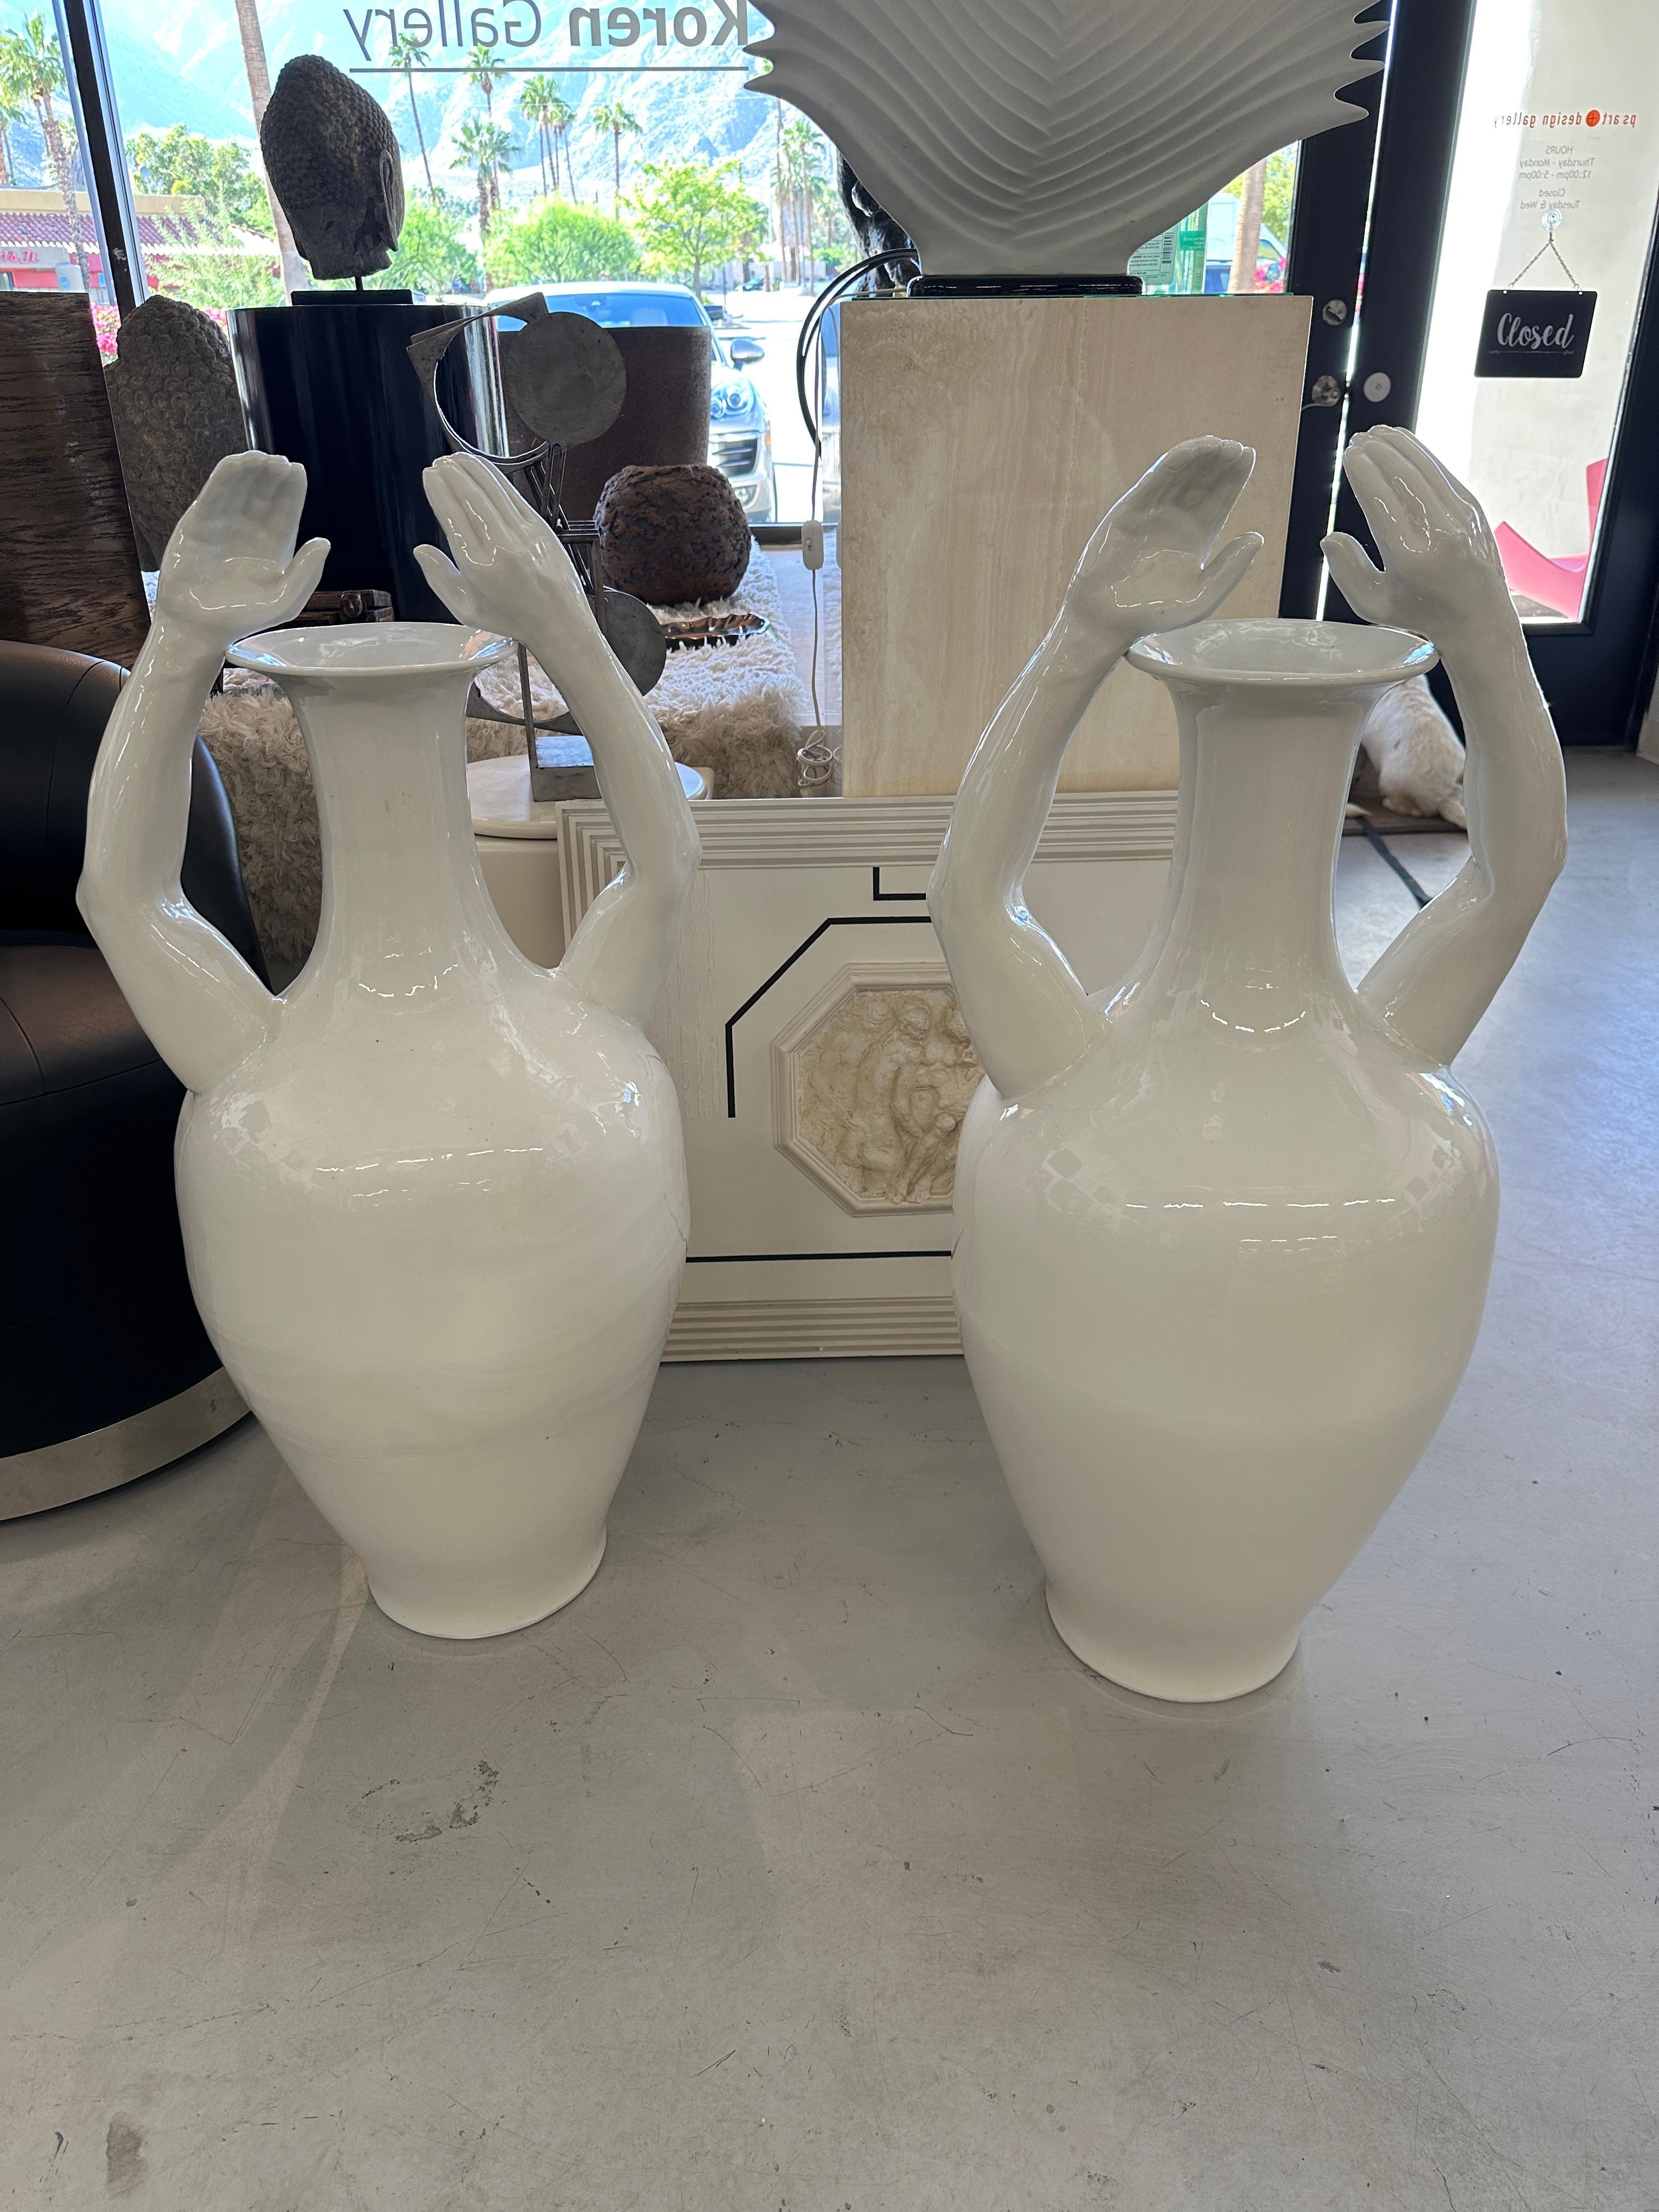 Stunning pair of massive “Hand” vases by Pols Potten of The Netherlands. Marked PP Global from Holland on a sticker. These appear to be hand thrown with ribbing up the pieces. Beautiful white glaze. In good condition with only some minor original